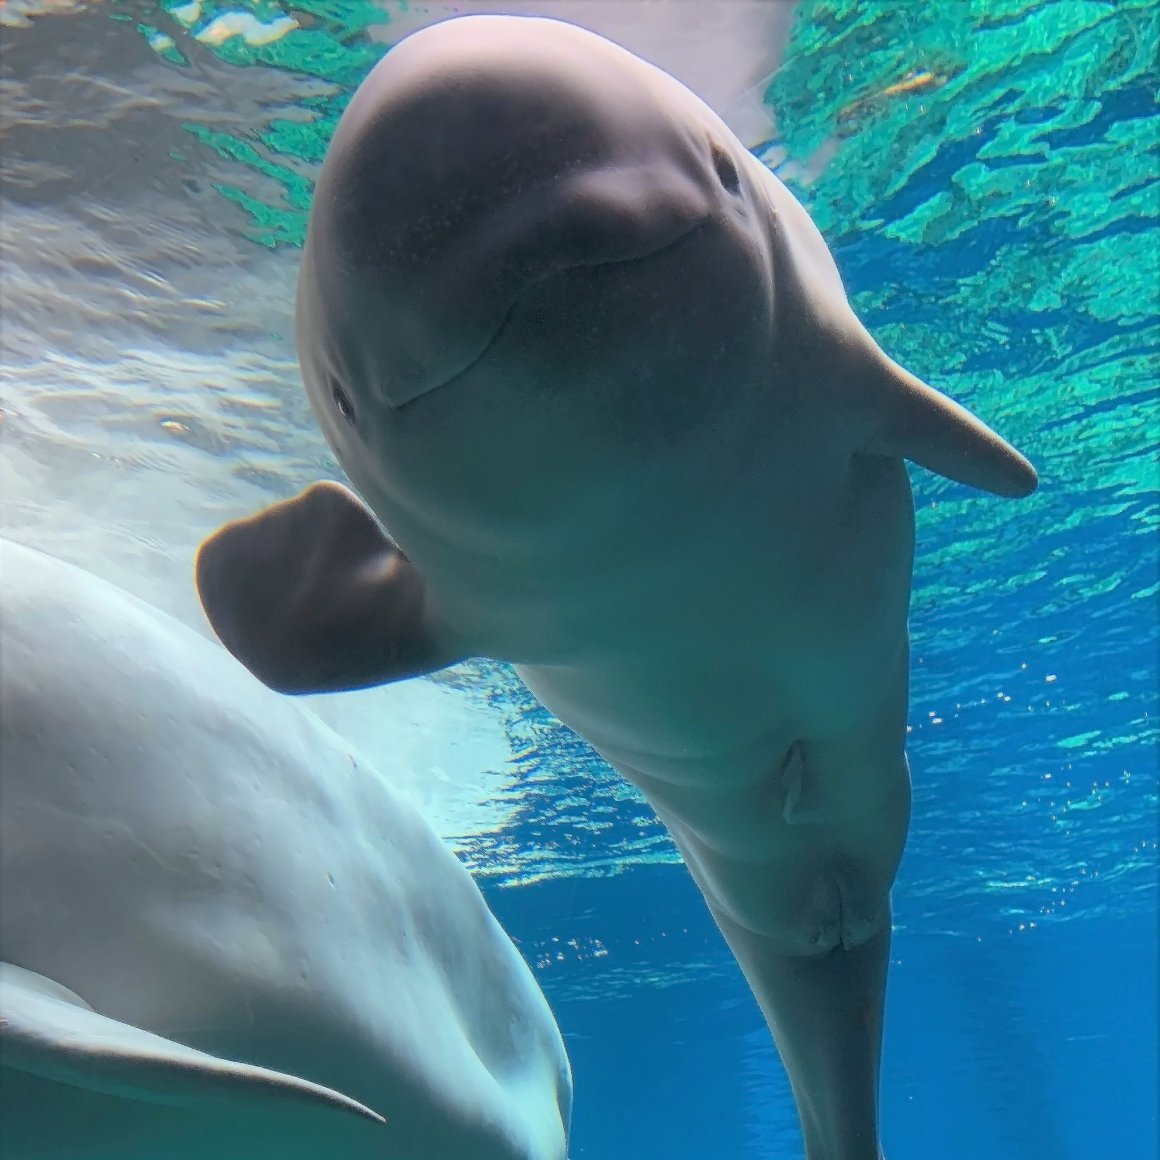 Don't Ride Beluga Whales: Marine Mammal Experts Circulate a Memo on How to Behave When Encountering Whales - Belukha, Whale, Wild animals, Primorsky Krai, Animal protection, Animal Rescue, Japanese Sea, Interesting, Longpost, Beluga whales